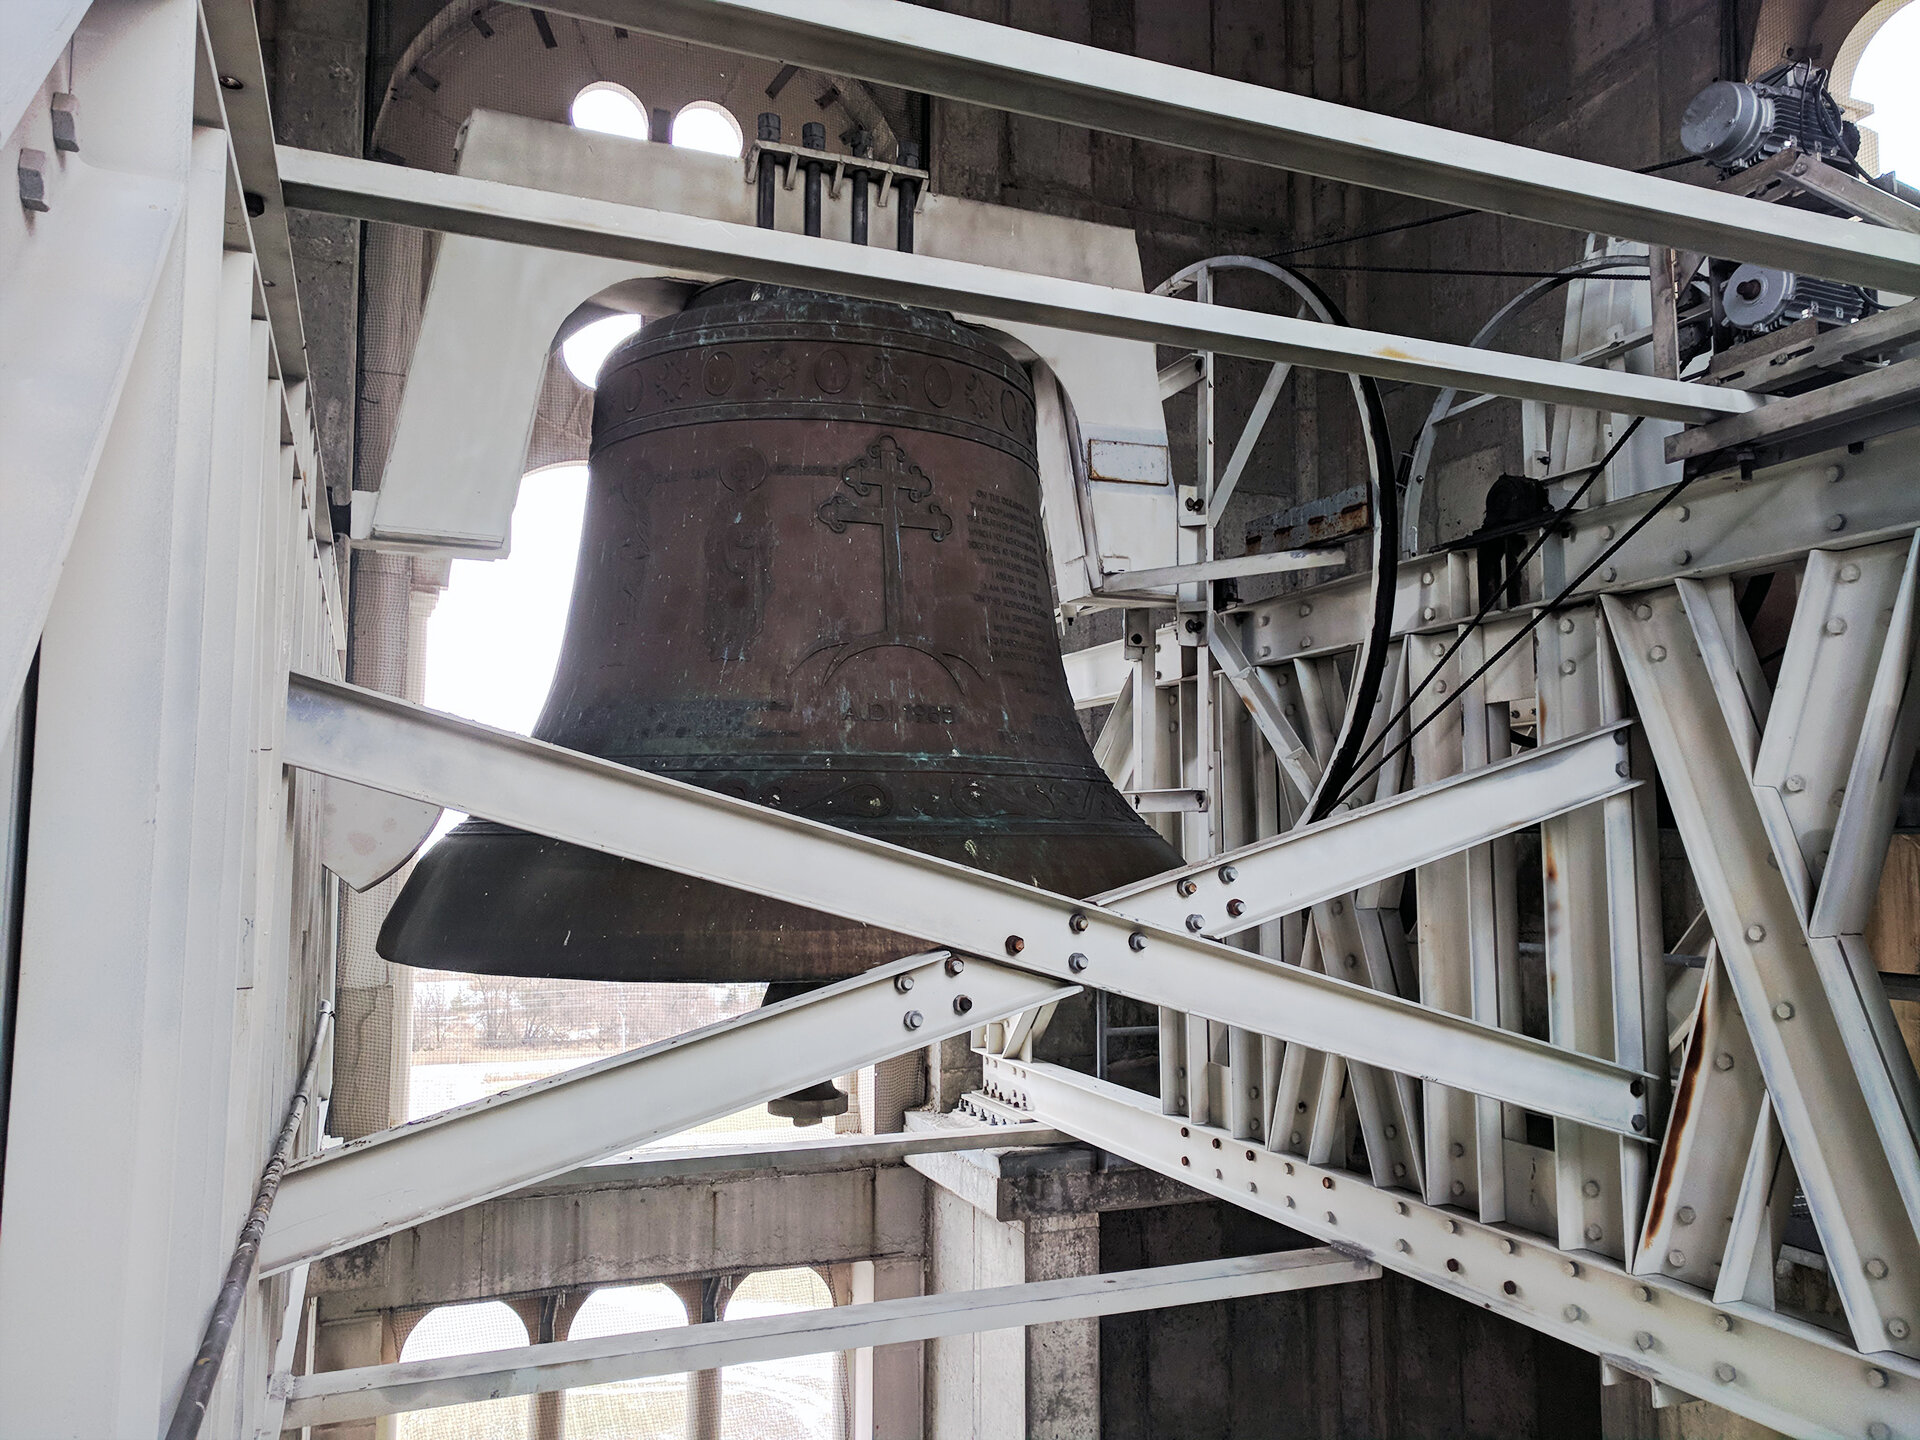 Church Bell electrification and automation equipment — Chime Master